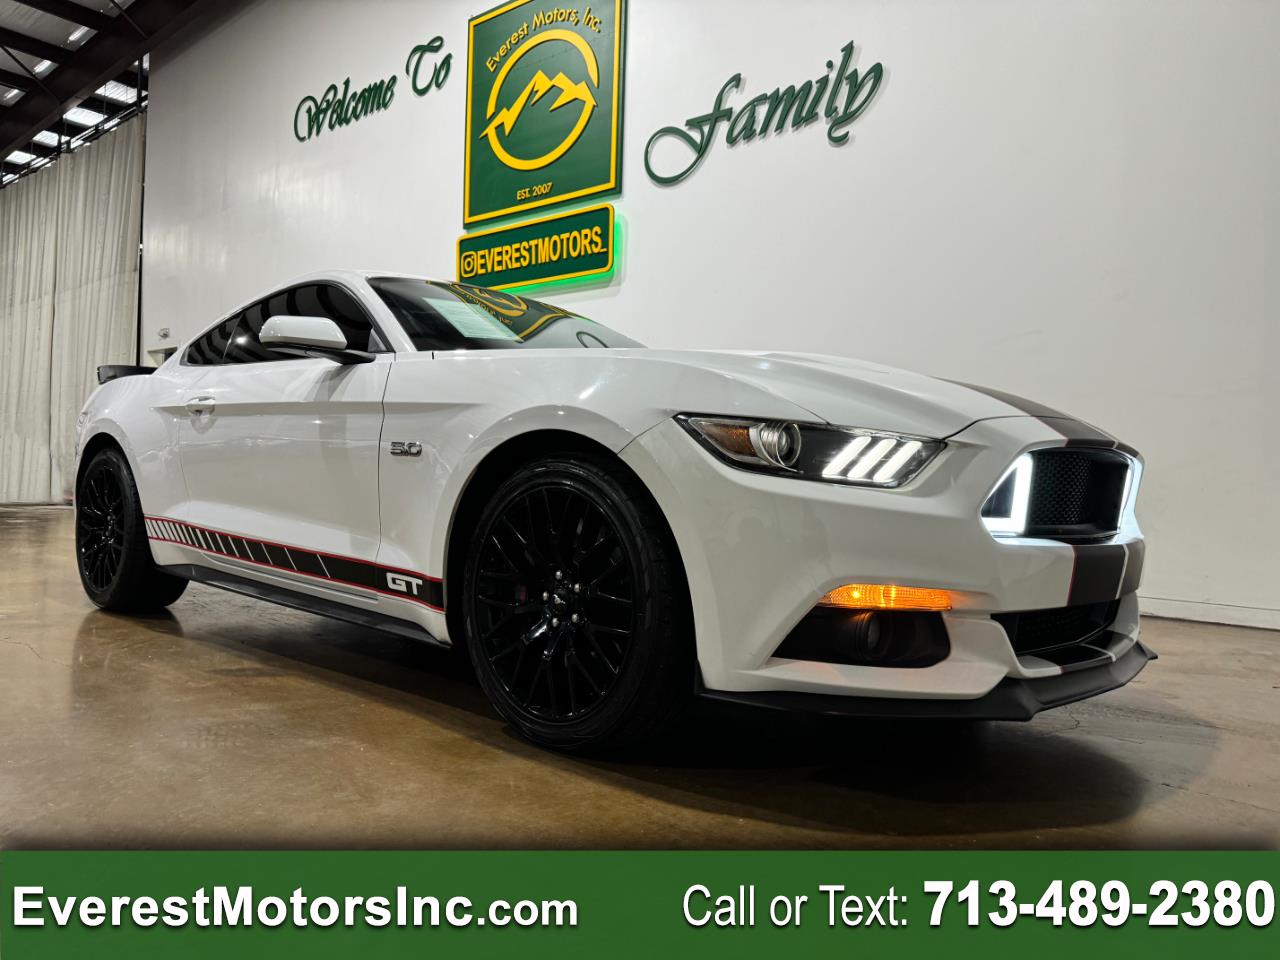 2017 Ford Mustang GT COUPE 2DR 5.0L V8 RWD "MANUAL" 1OWNER